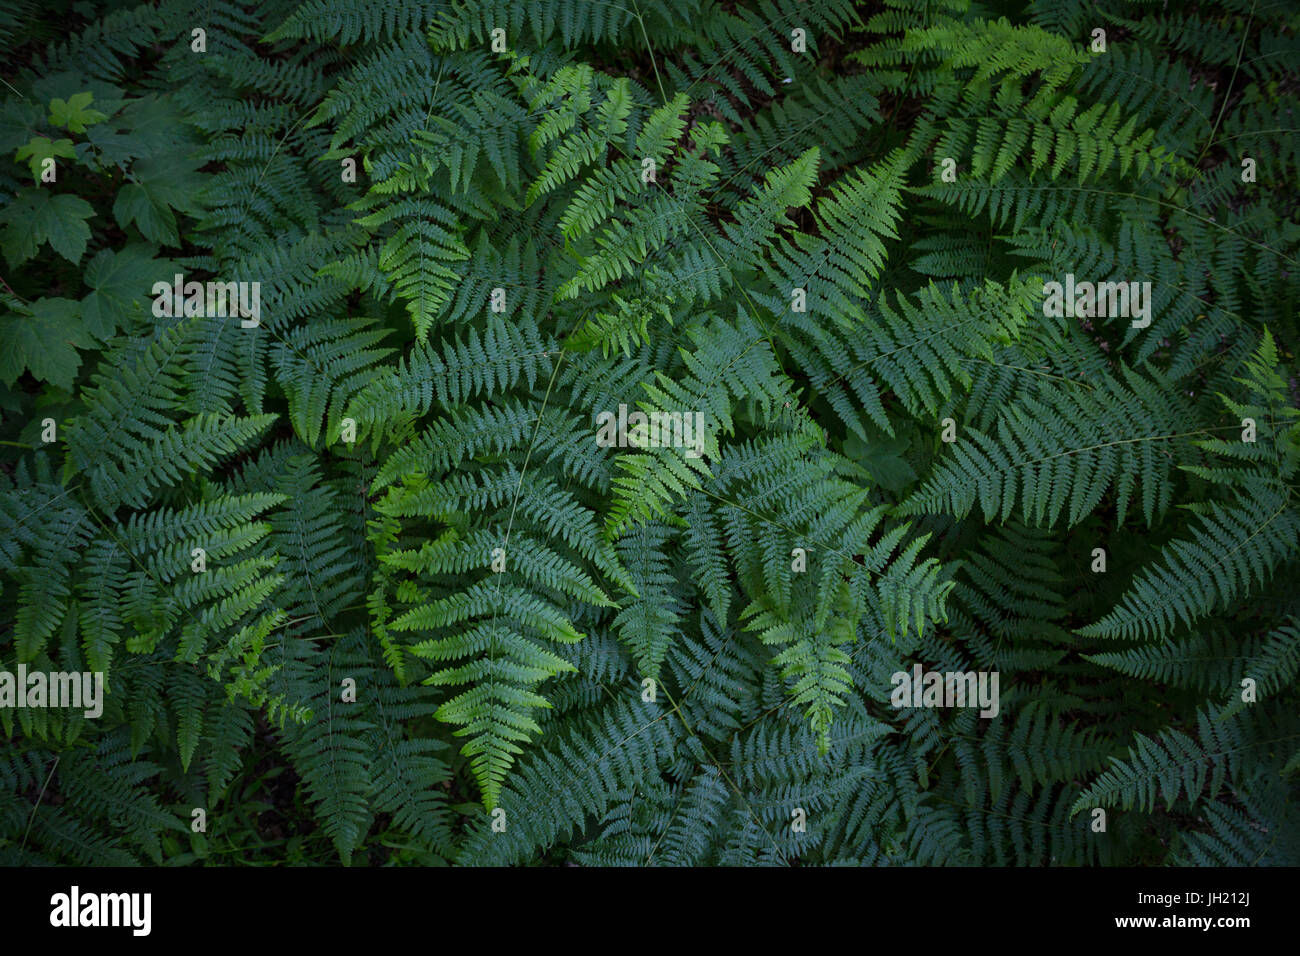 Natural texture or background from the forest floor: Top view of green fern or bracken leaves in late spring - Pteridium aquilinum. Stock Photo